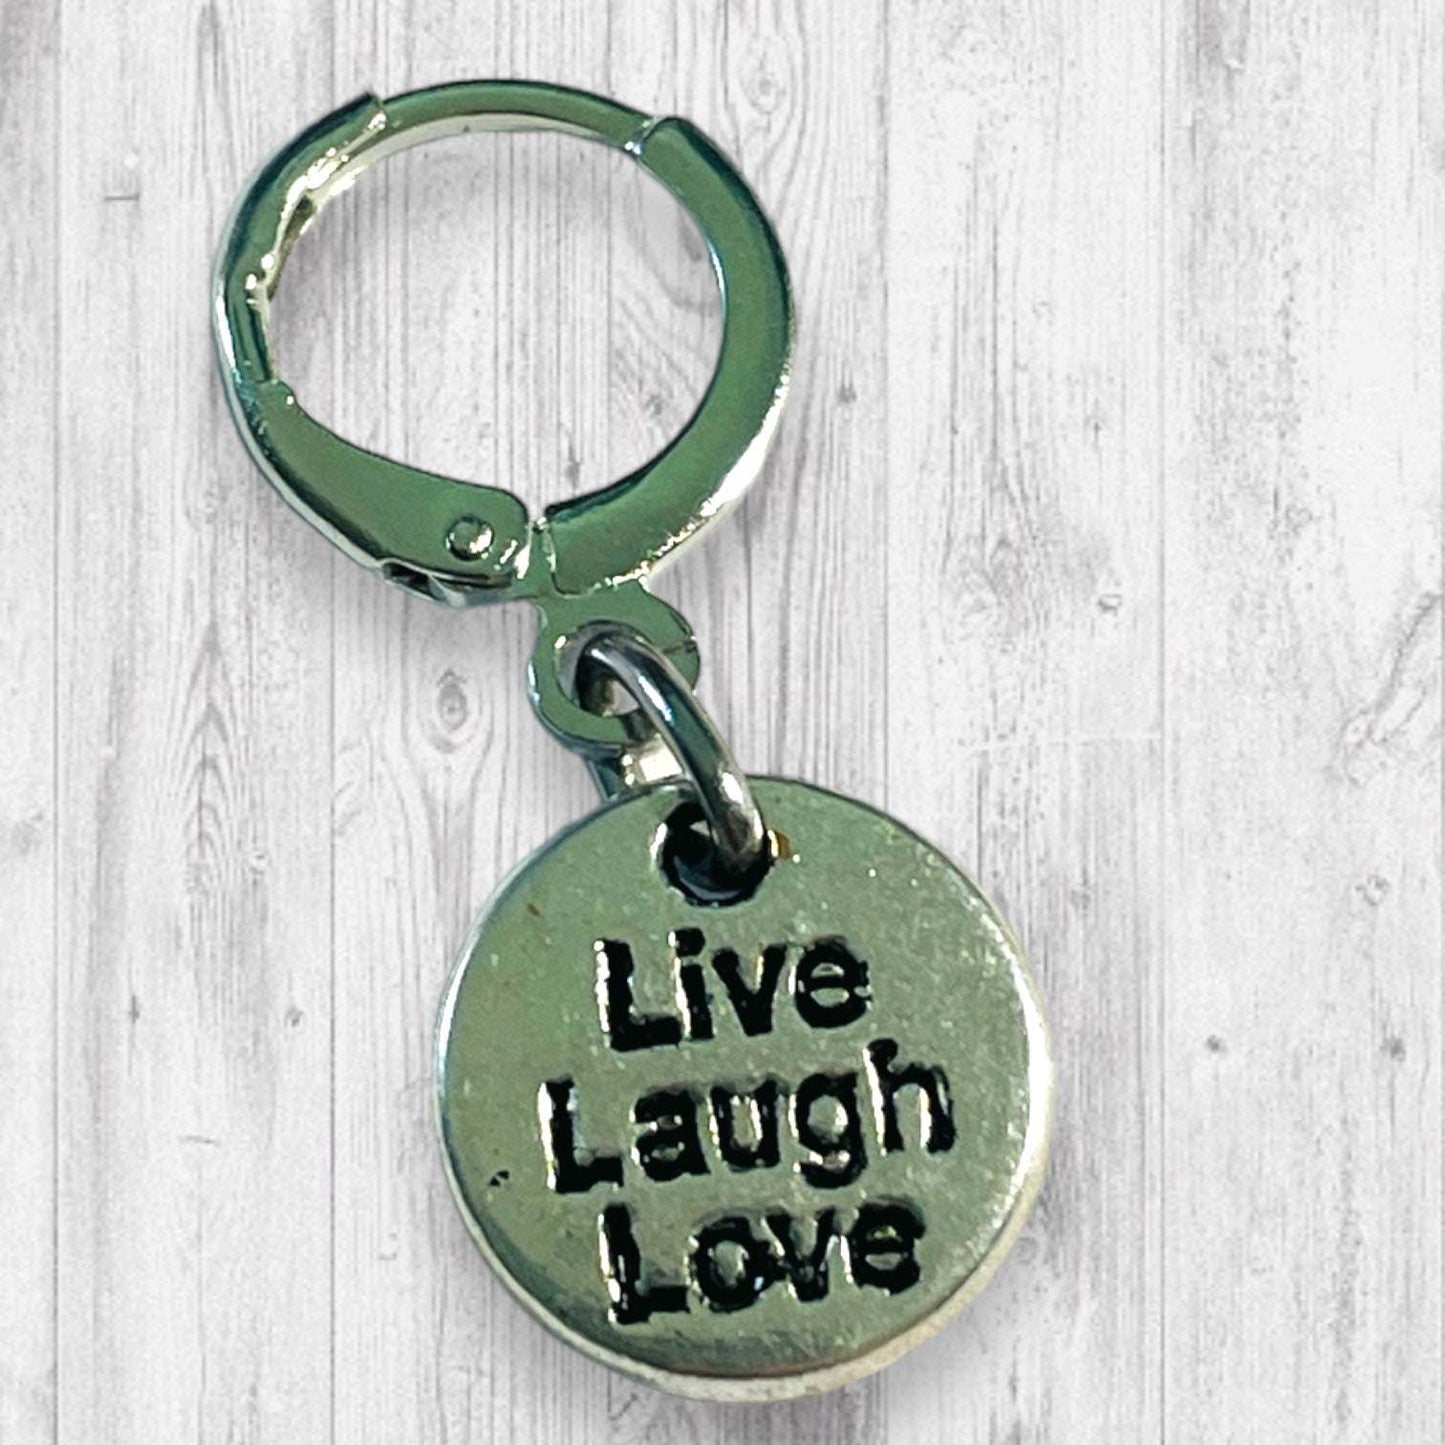 Live Laugh Love Together Heart Progress and Stitch Markers